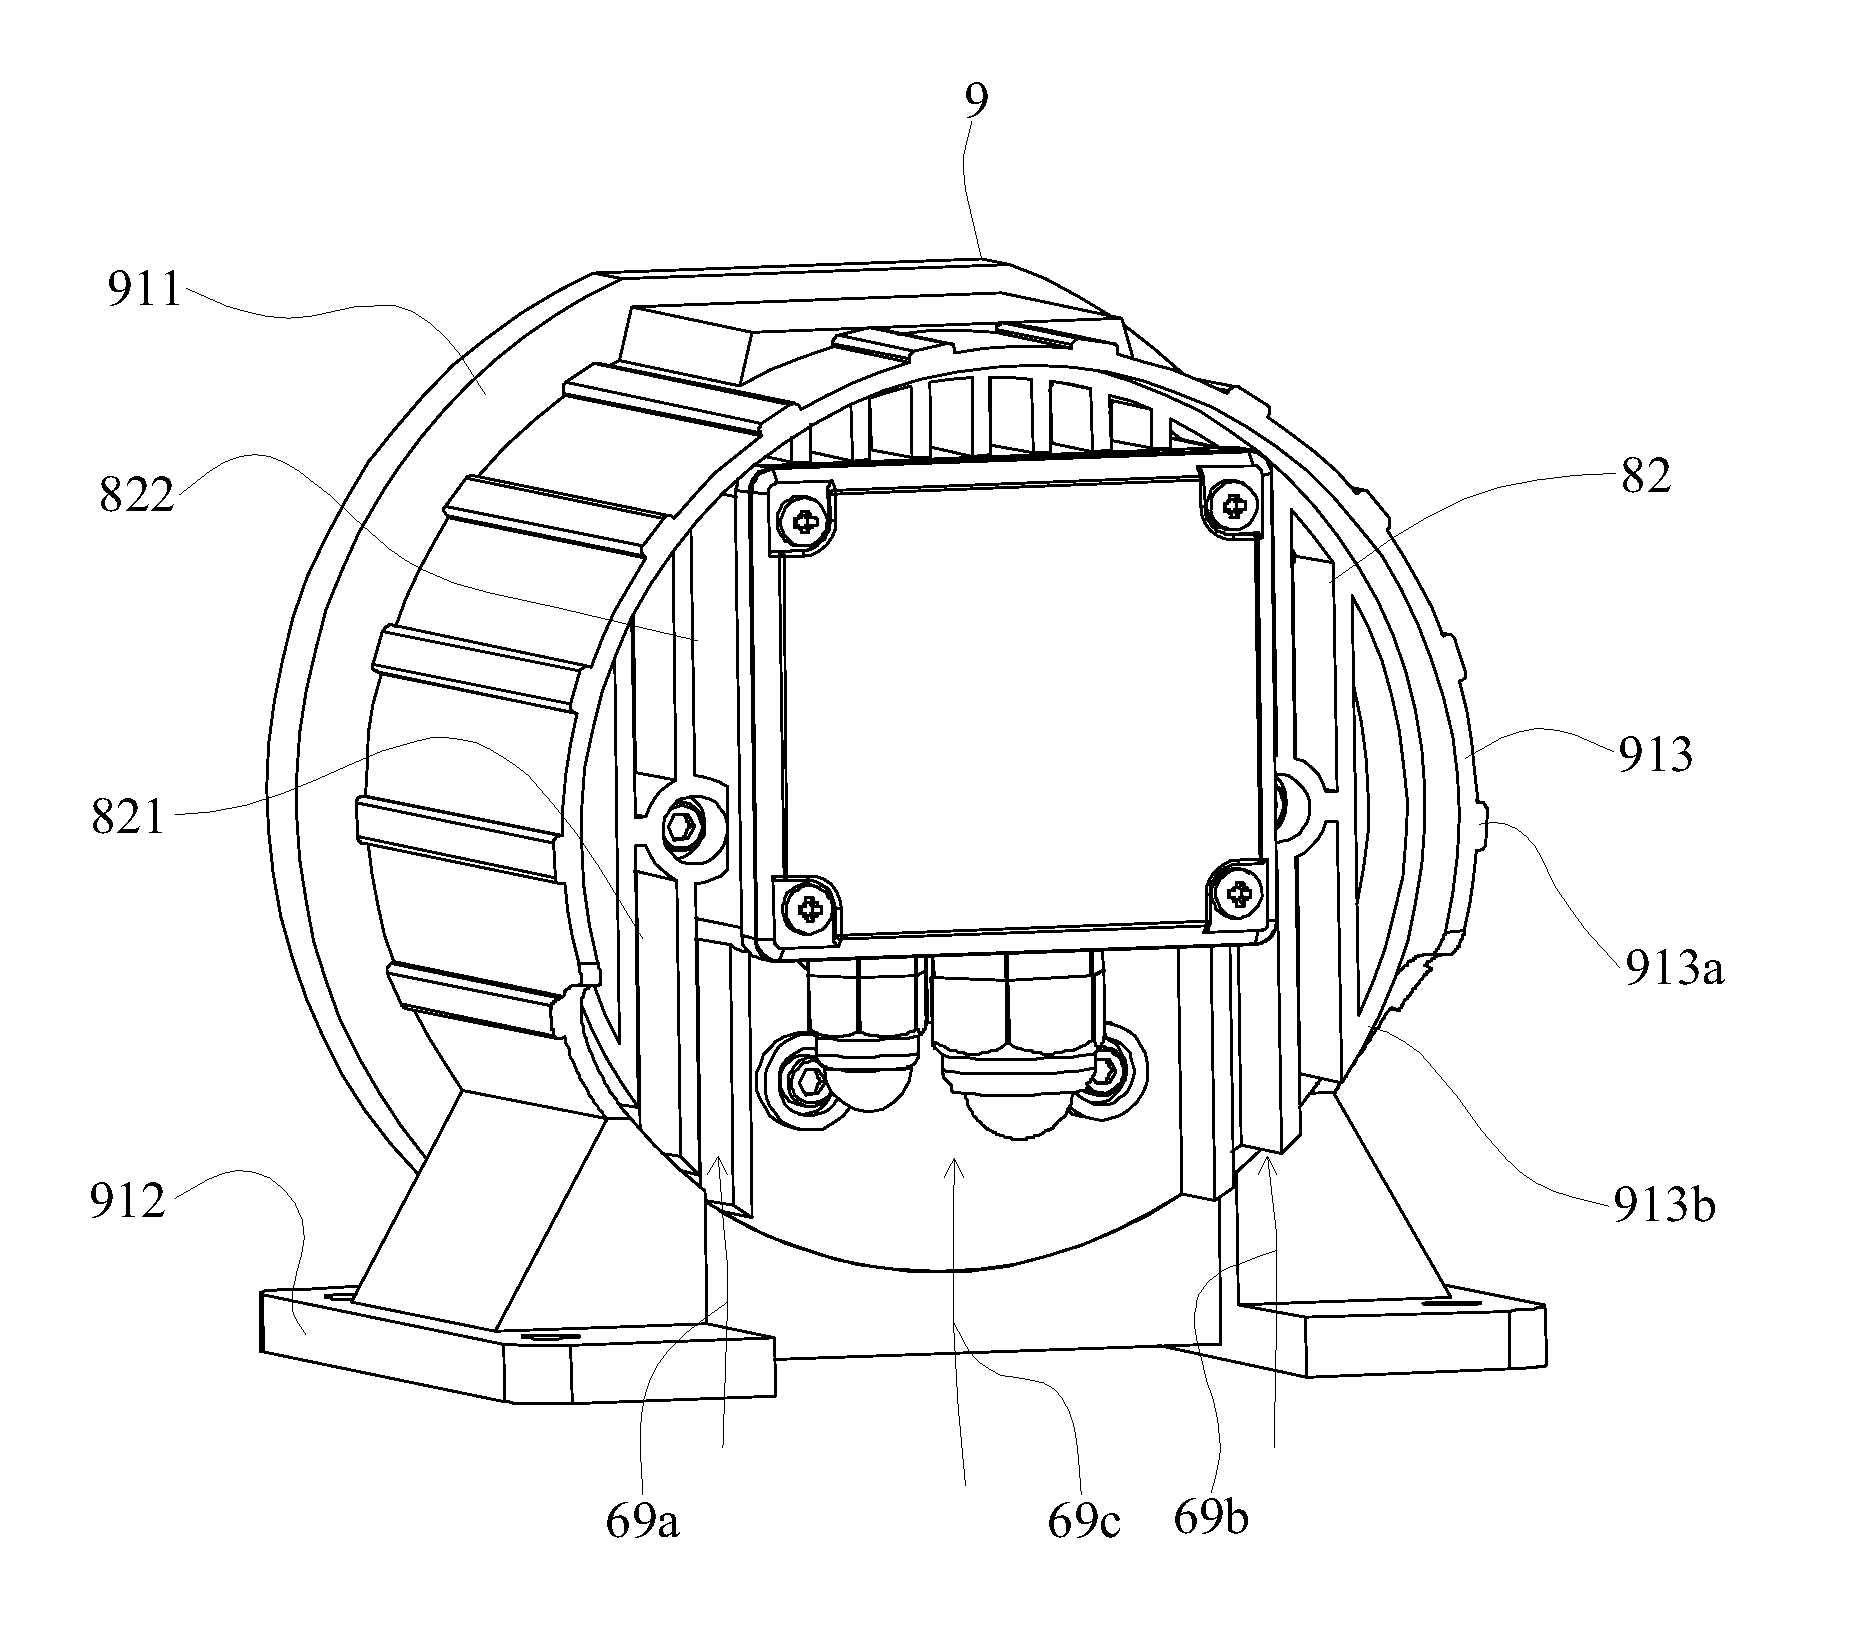 Permanent magnet canned motor pump with corrosion-protection housing